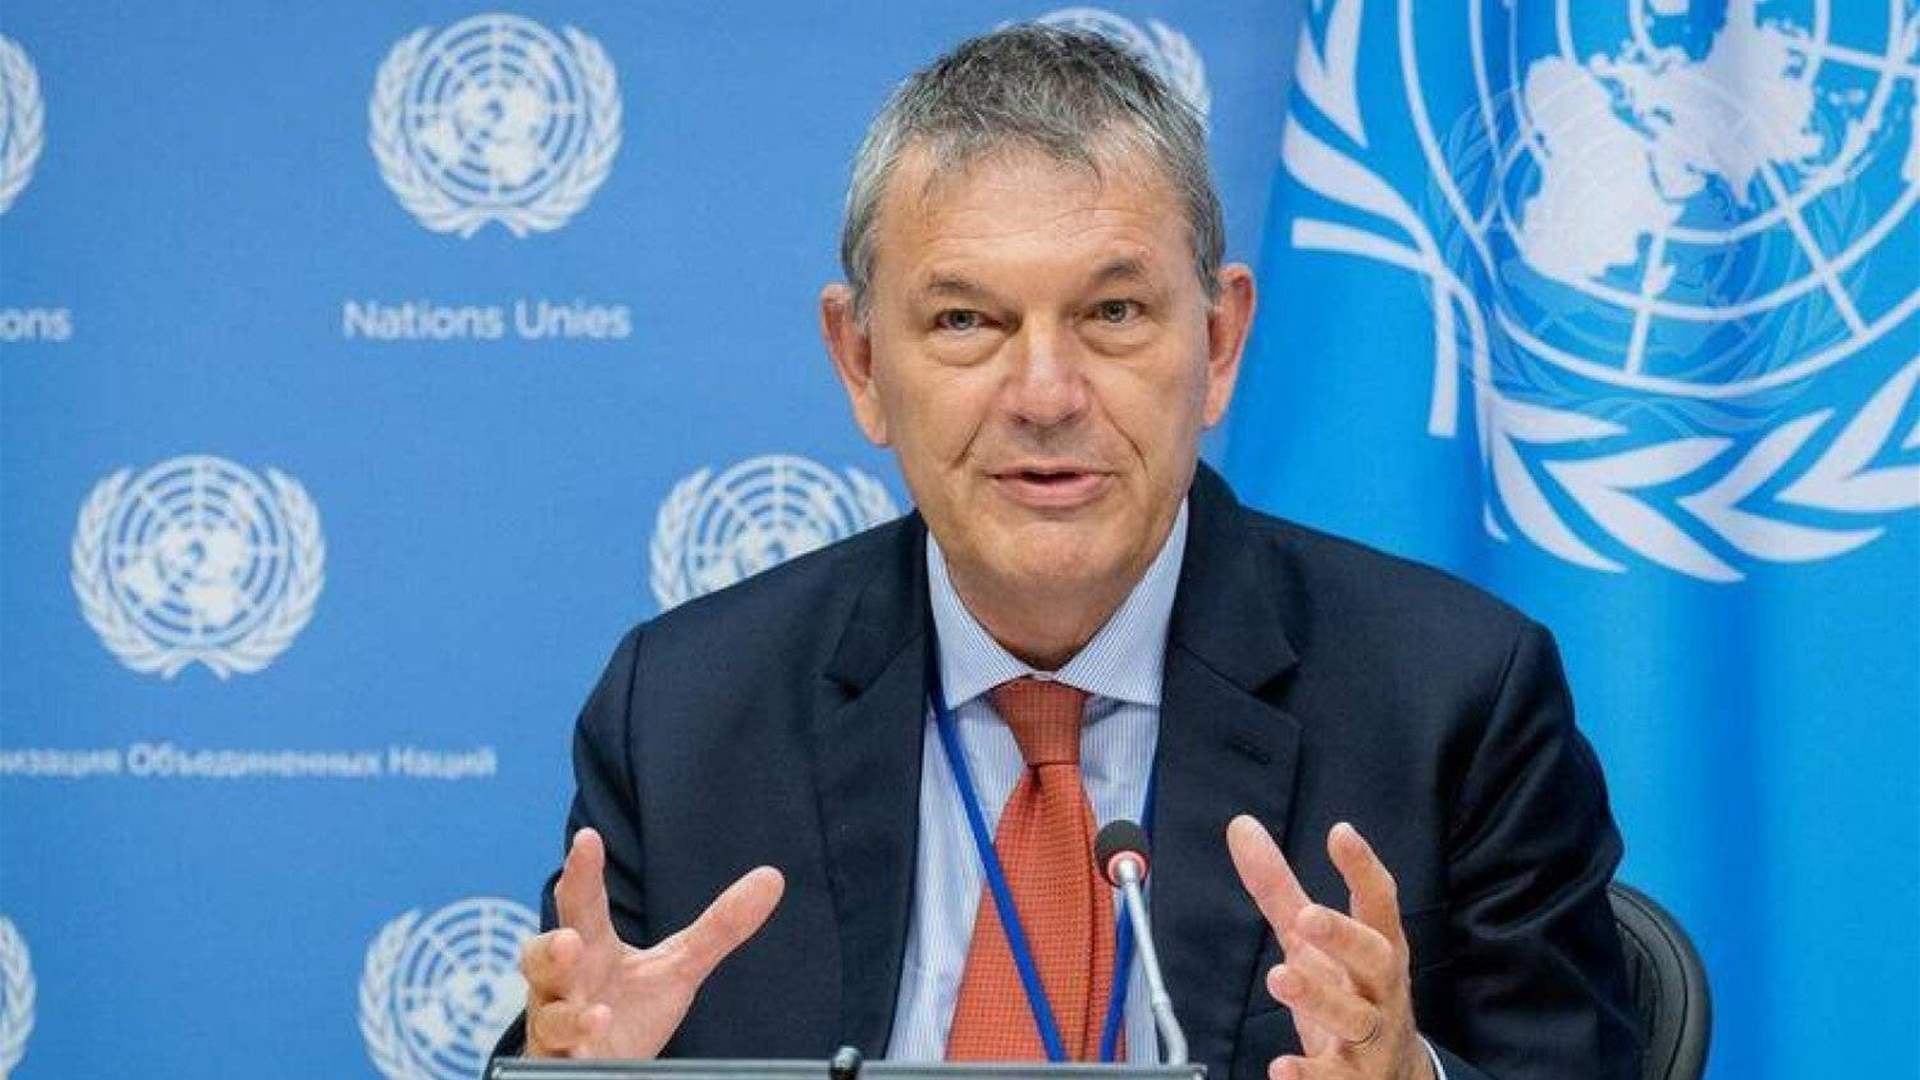 Lazzarini: Israel is out to destroy UNRWA